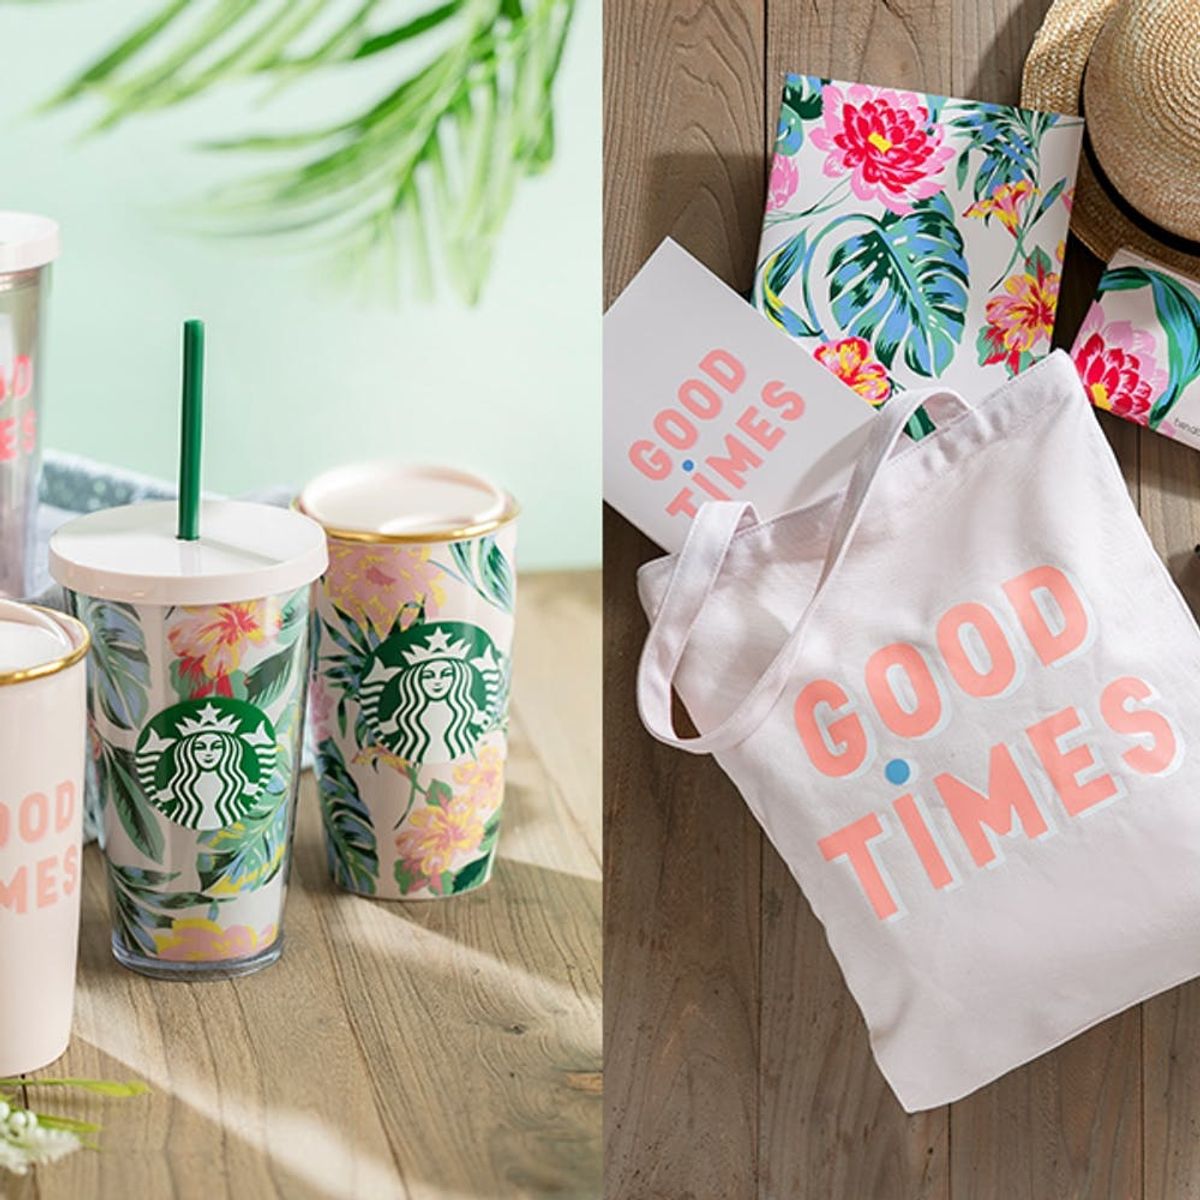 Starbucks + Ban.do’s New Collaboration Has the Perfect Summer Vibe… But There’s a Catch